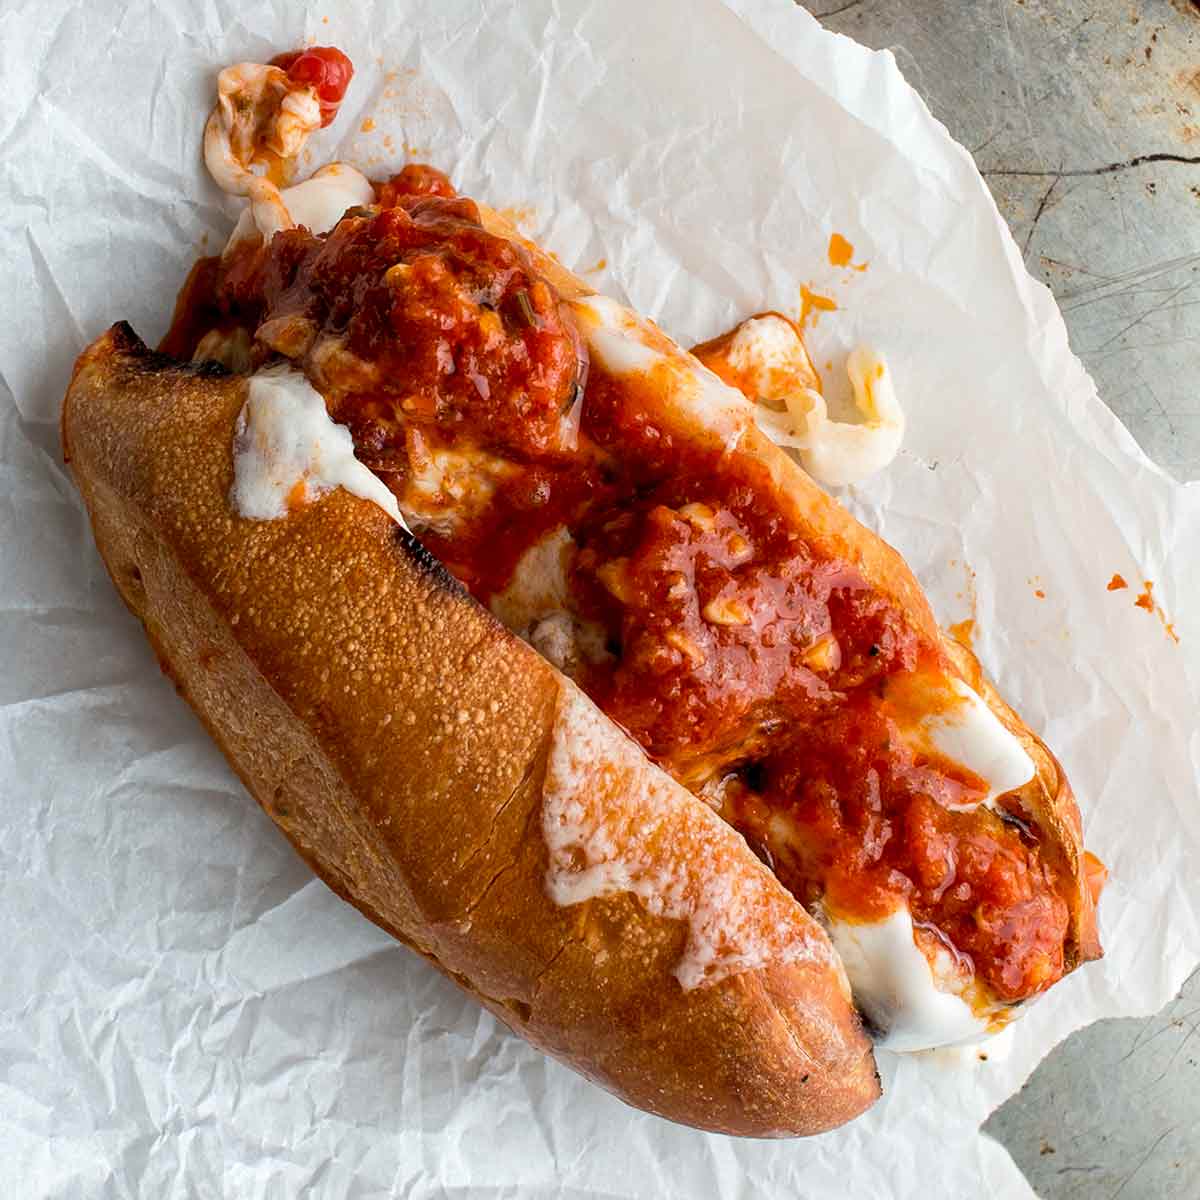 A harissa meatballs sandwich, made with three meatballs stuffed in a sub roll along with cheese and topped with tomato sauce on a sheet of parchment paper.